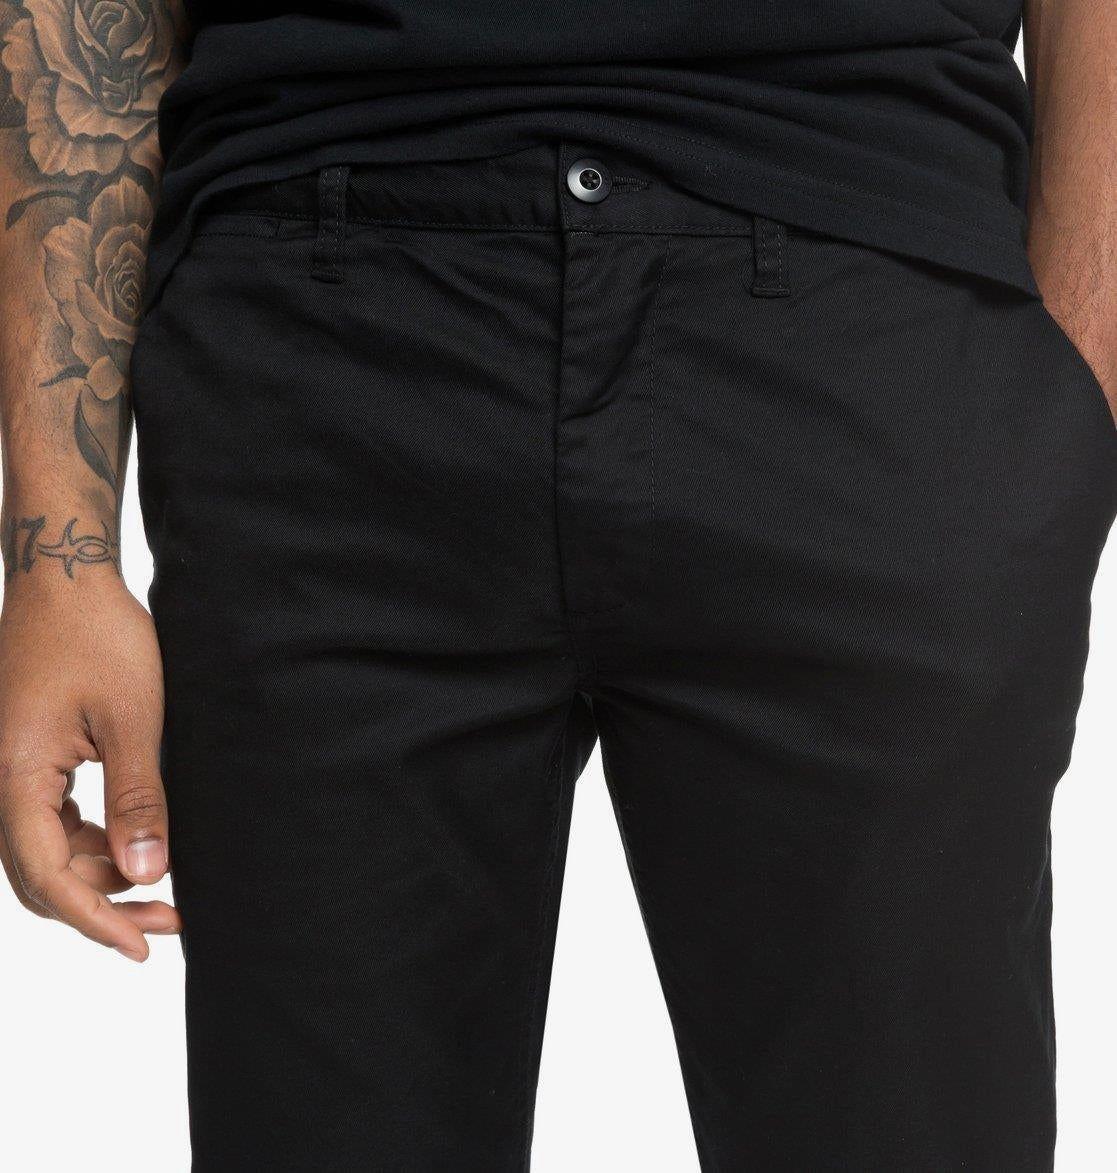 DC Shoes Worker Slim Fit Chino Pants Black